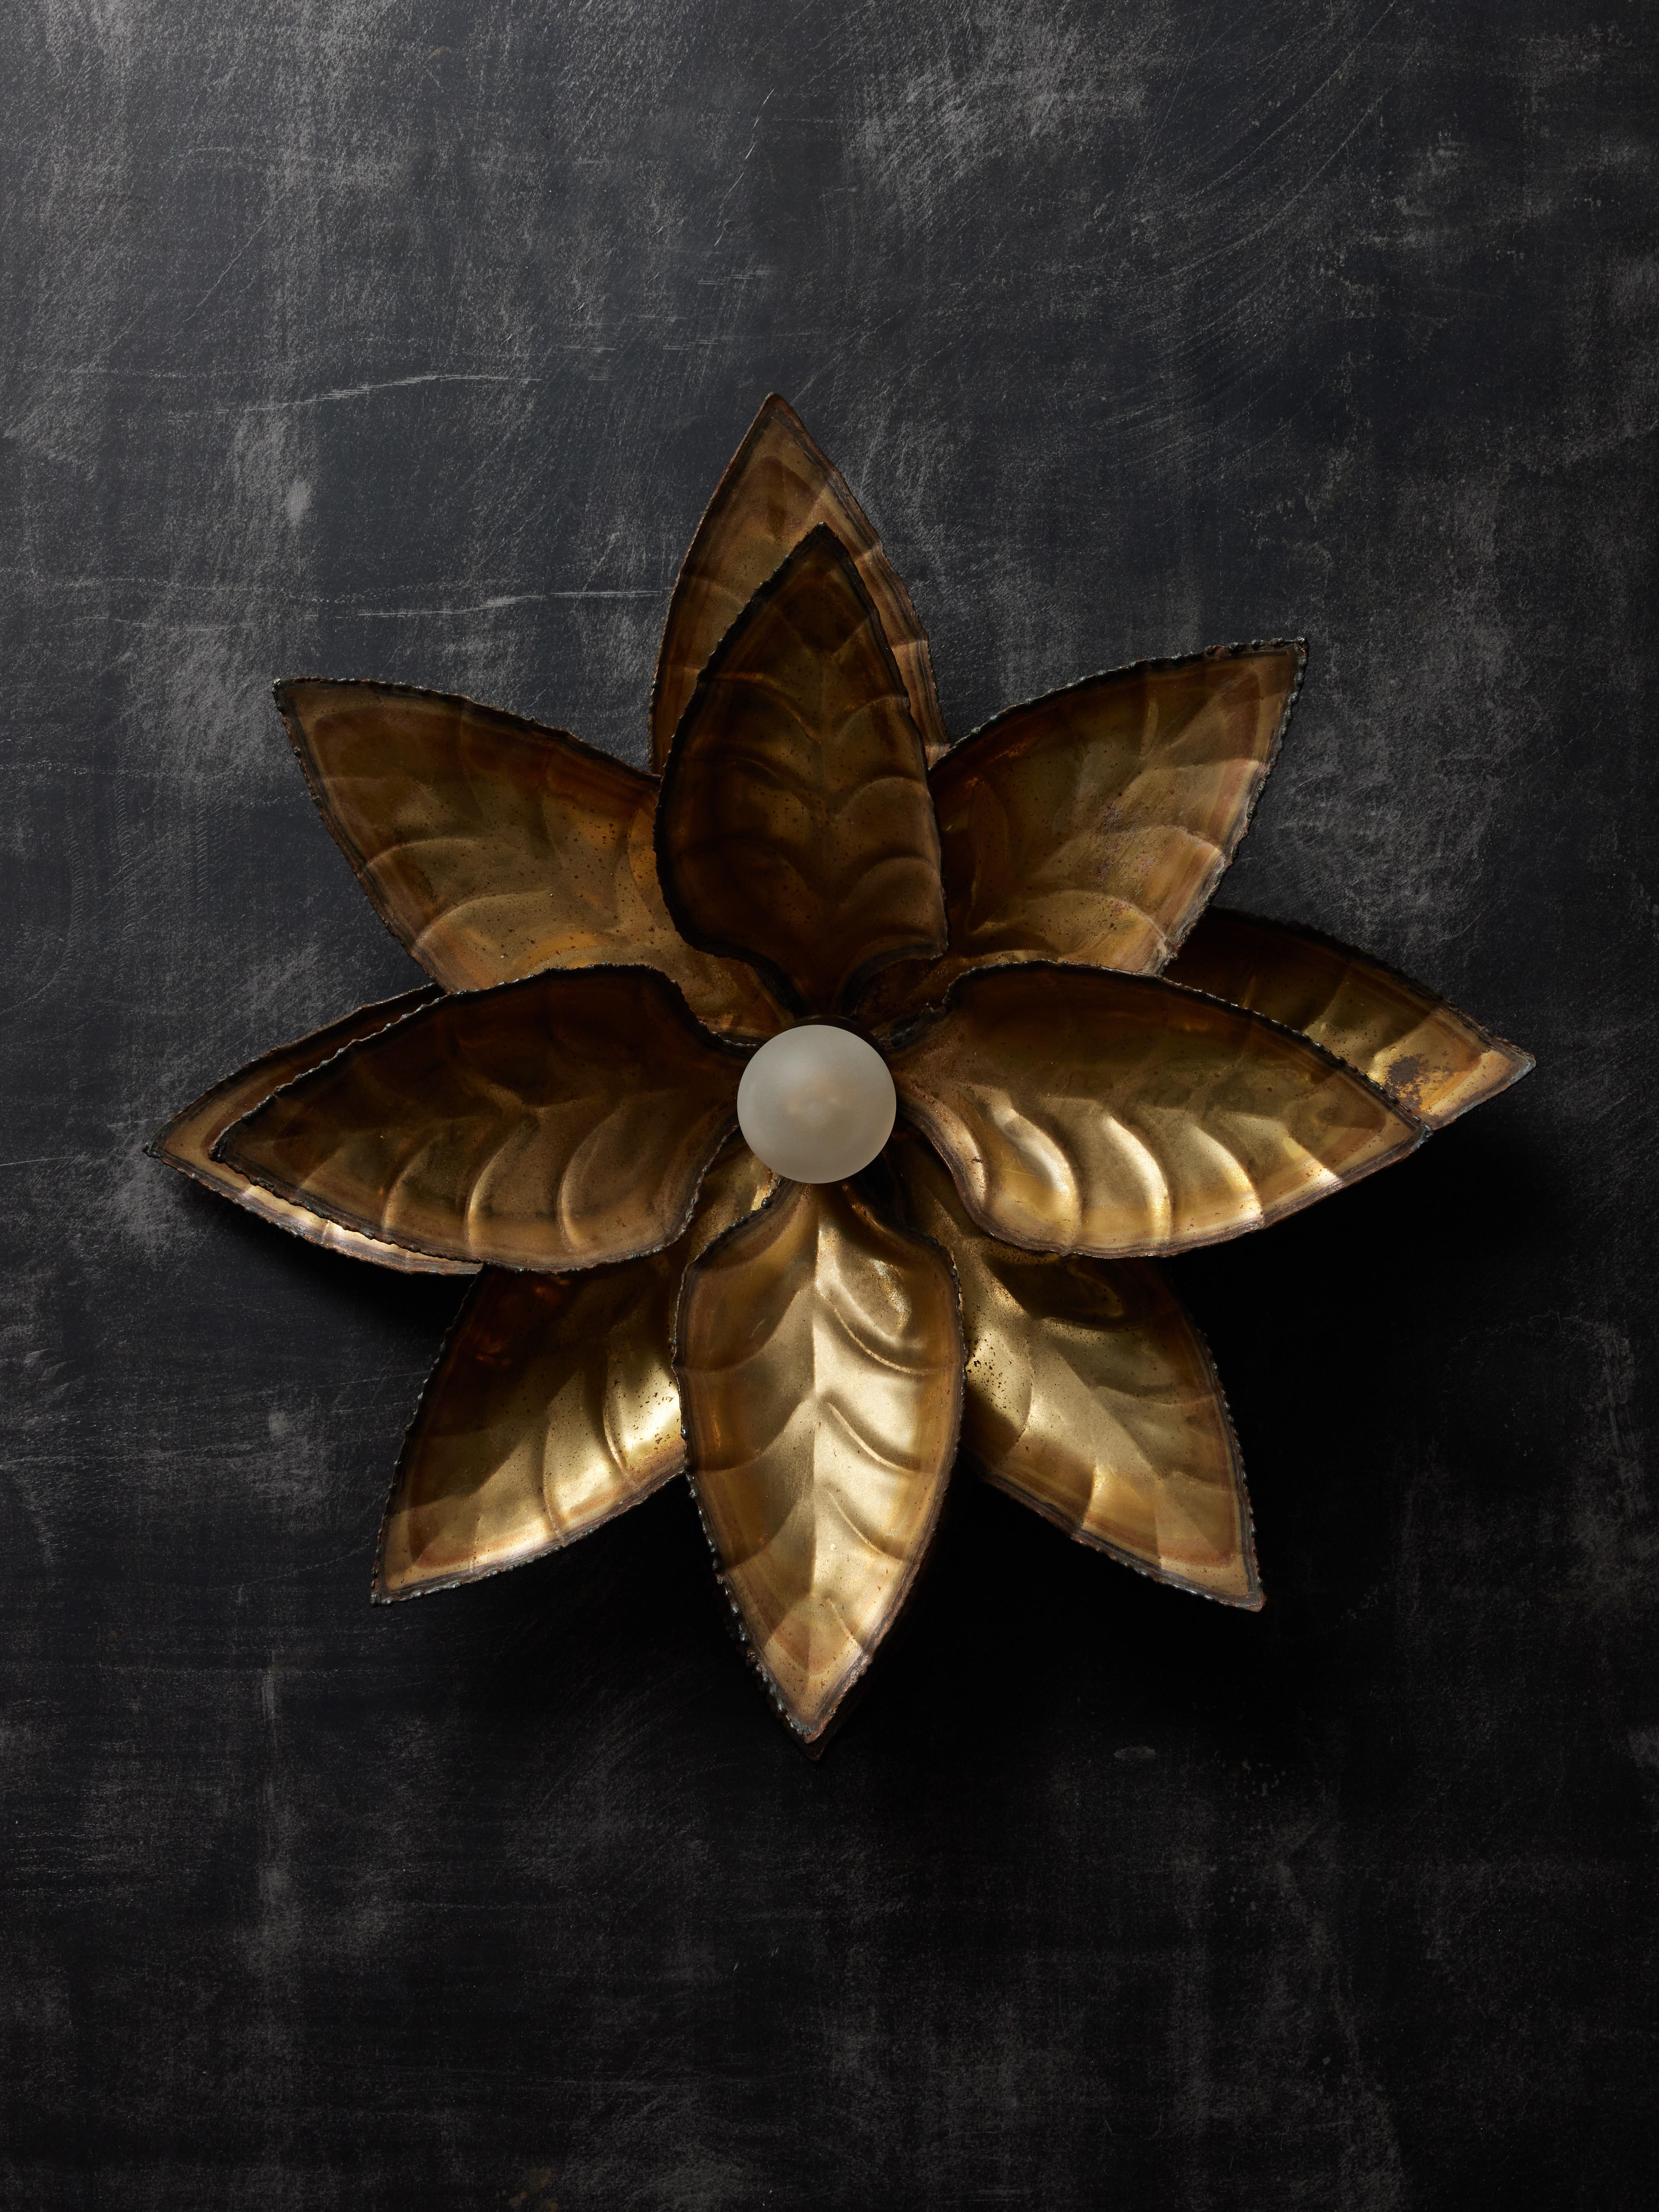 Pair of vintage wall sconces, shaped like an open flower and entirely made of patinated brass. Each sconce has one single light source in its center.